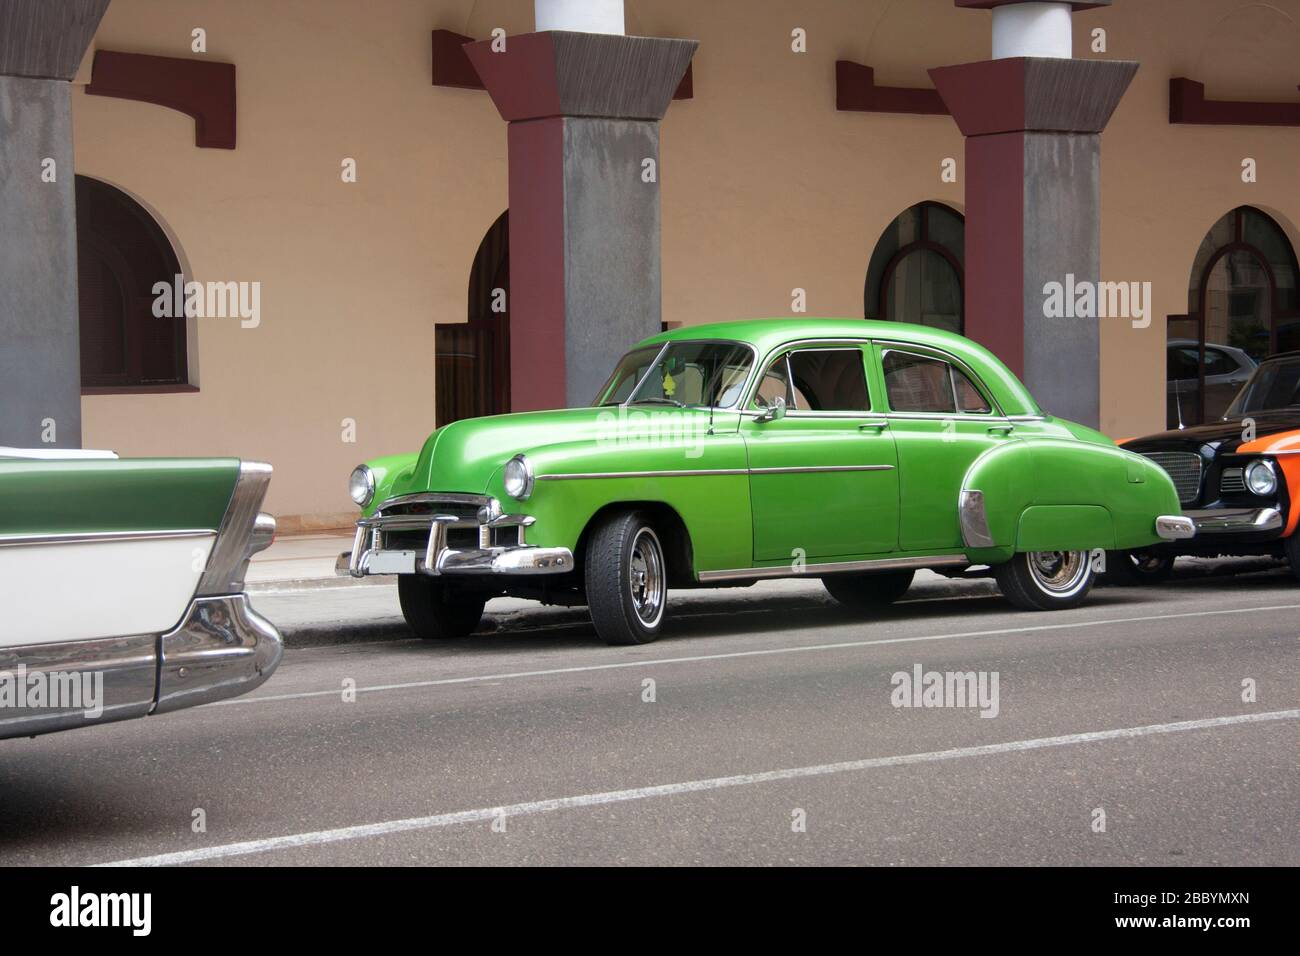 HAVANA, CUBA - APRIL 01, 2017: American classic car from the 50s in green color parked in central street of the city of Havana, Cuba Stock Photo